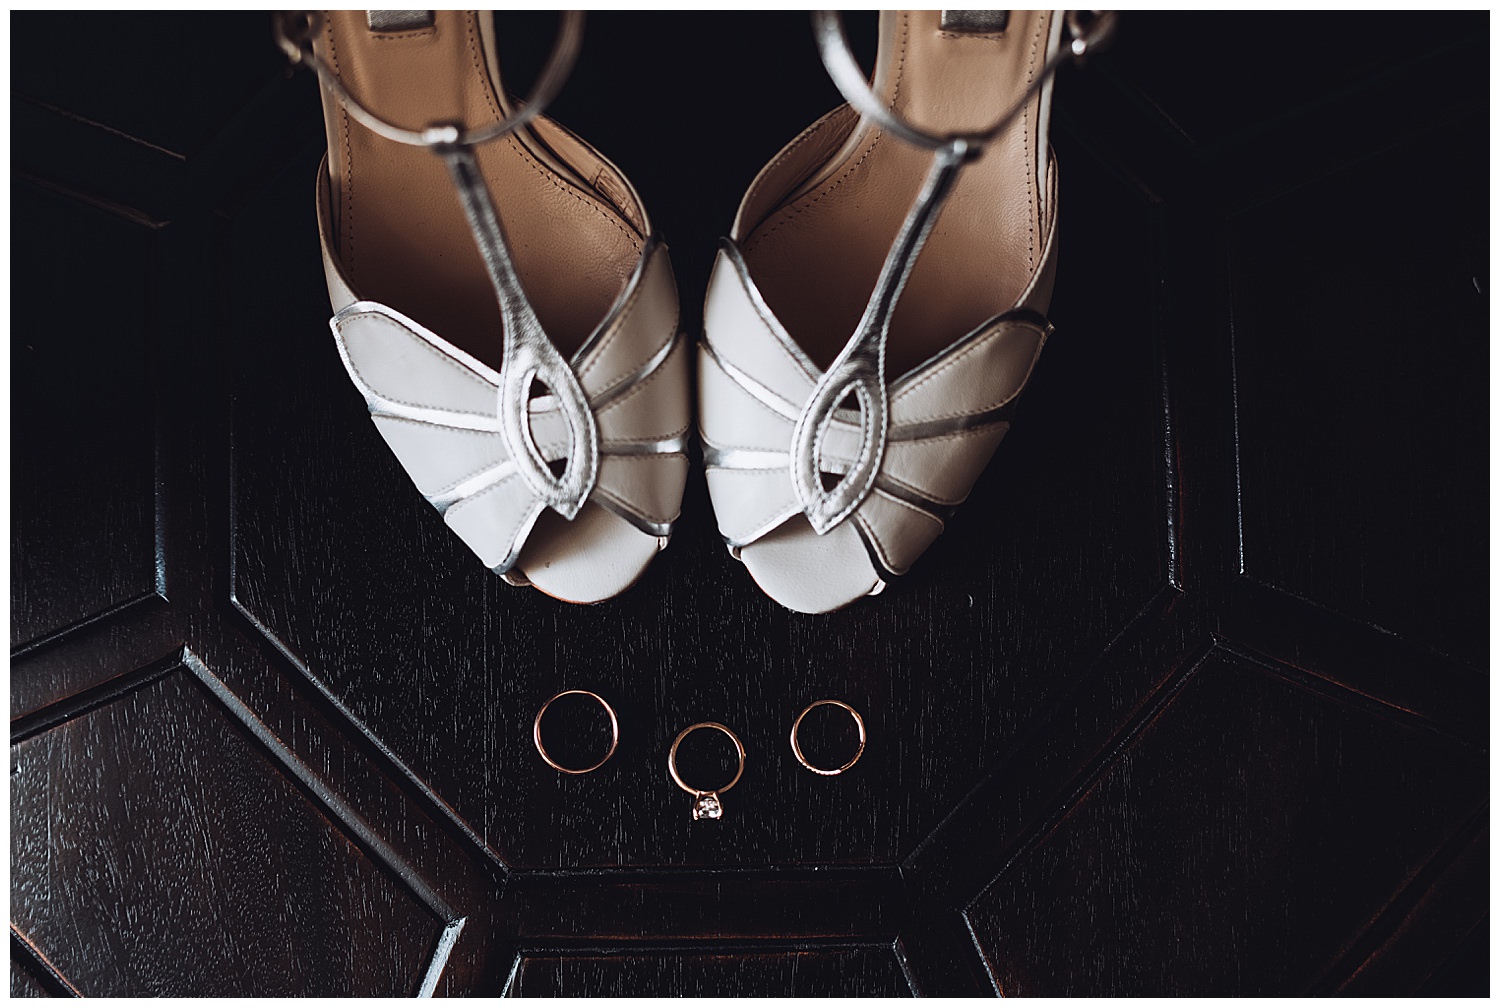 The carleton of Oak Park Wedding getting ready, shoes and ring details